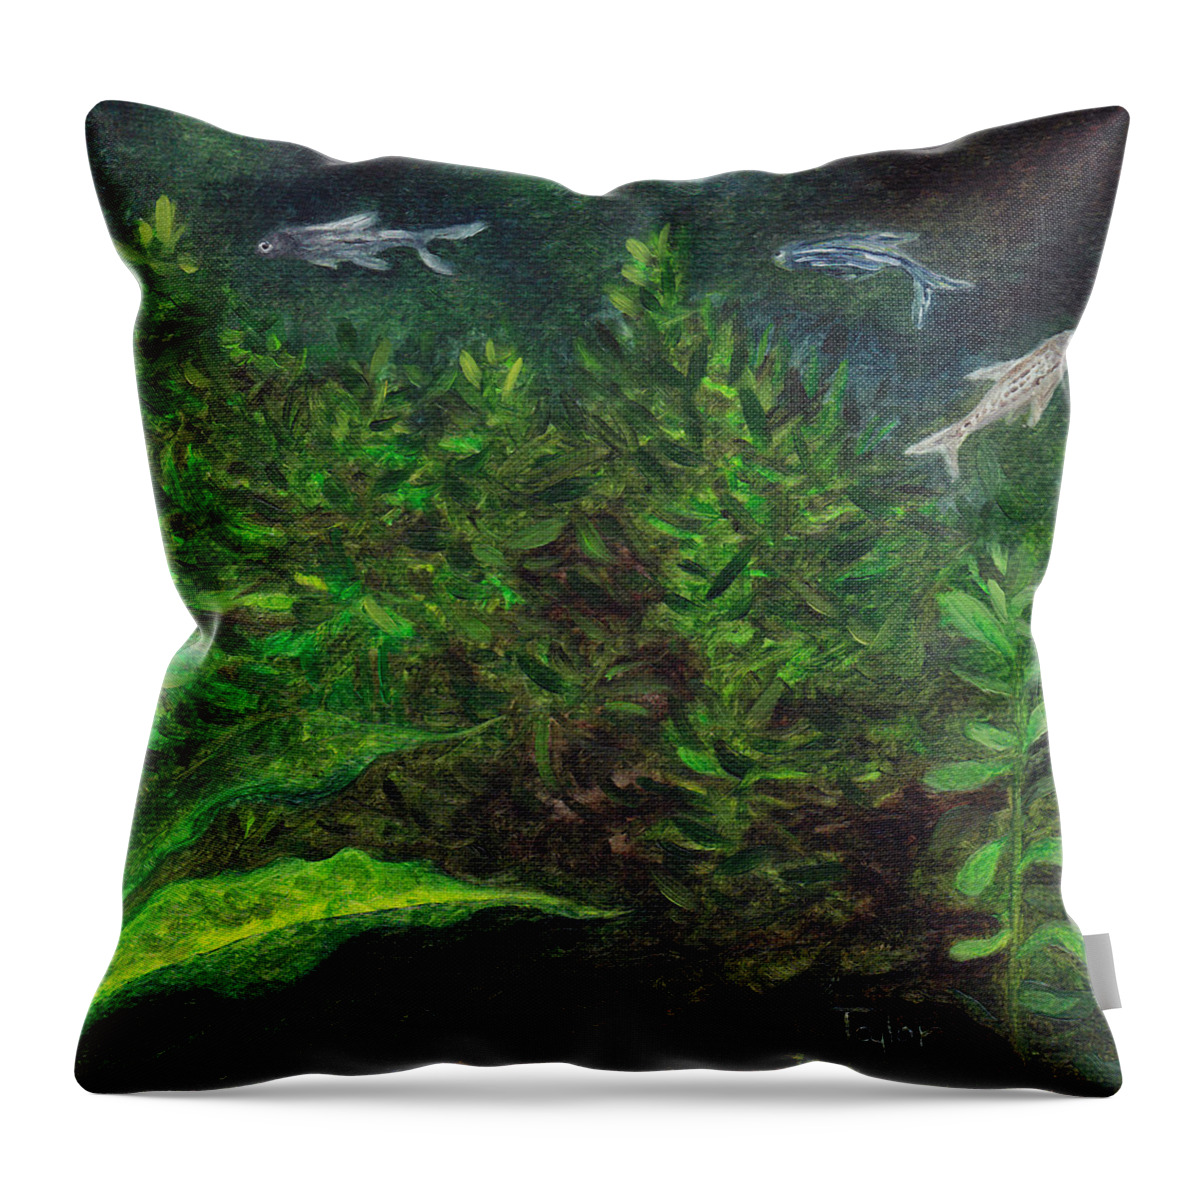 Aquarium Throw Pillow featuring the painting Danios by FT McKinstry